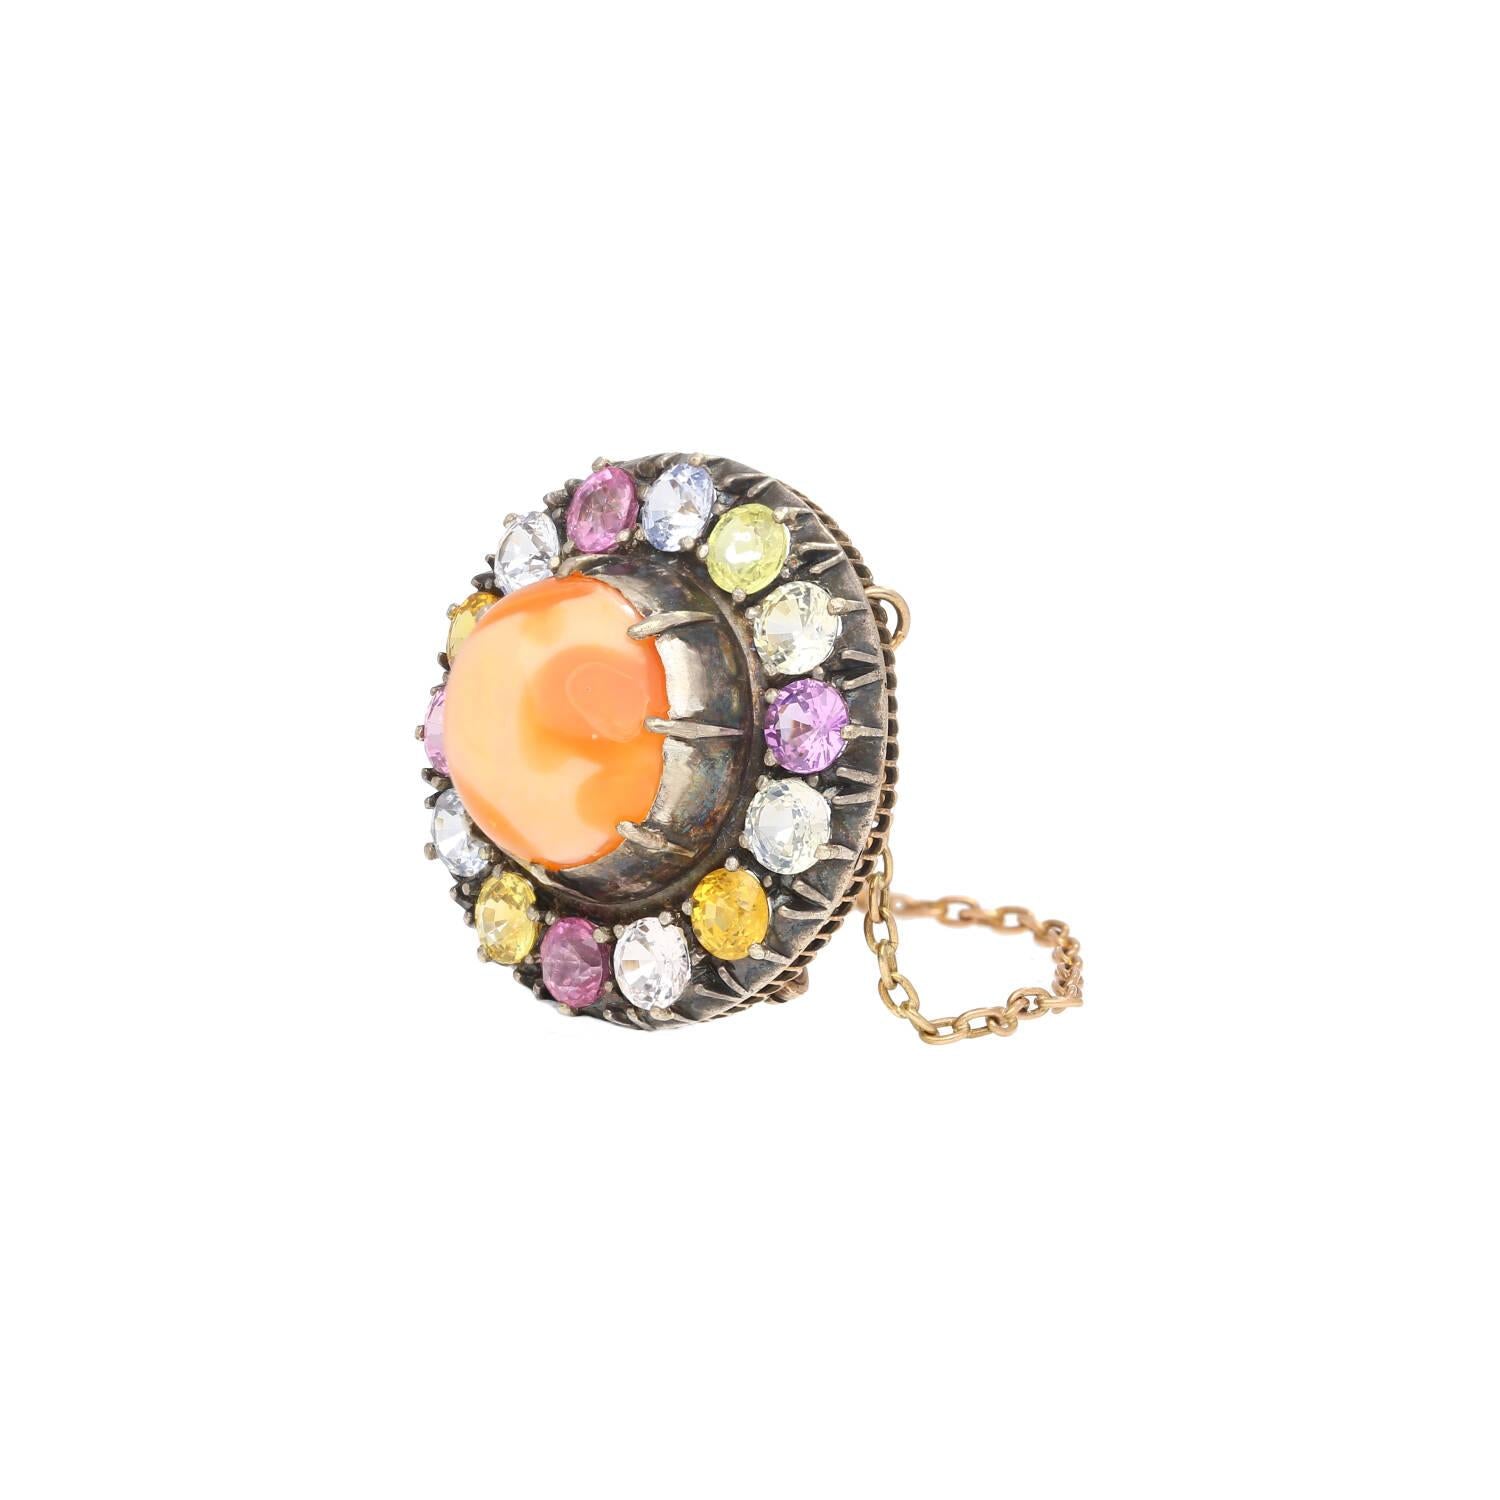 Natural 4.64 Carat Opal Pin with Multi Color Sapphire Detailing in Gold & Silver